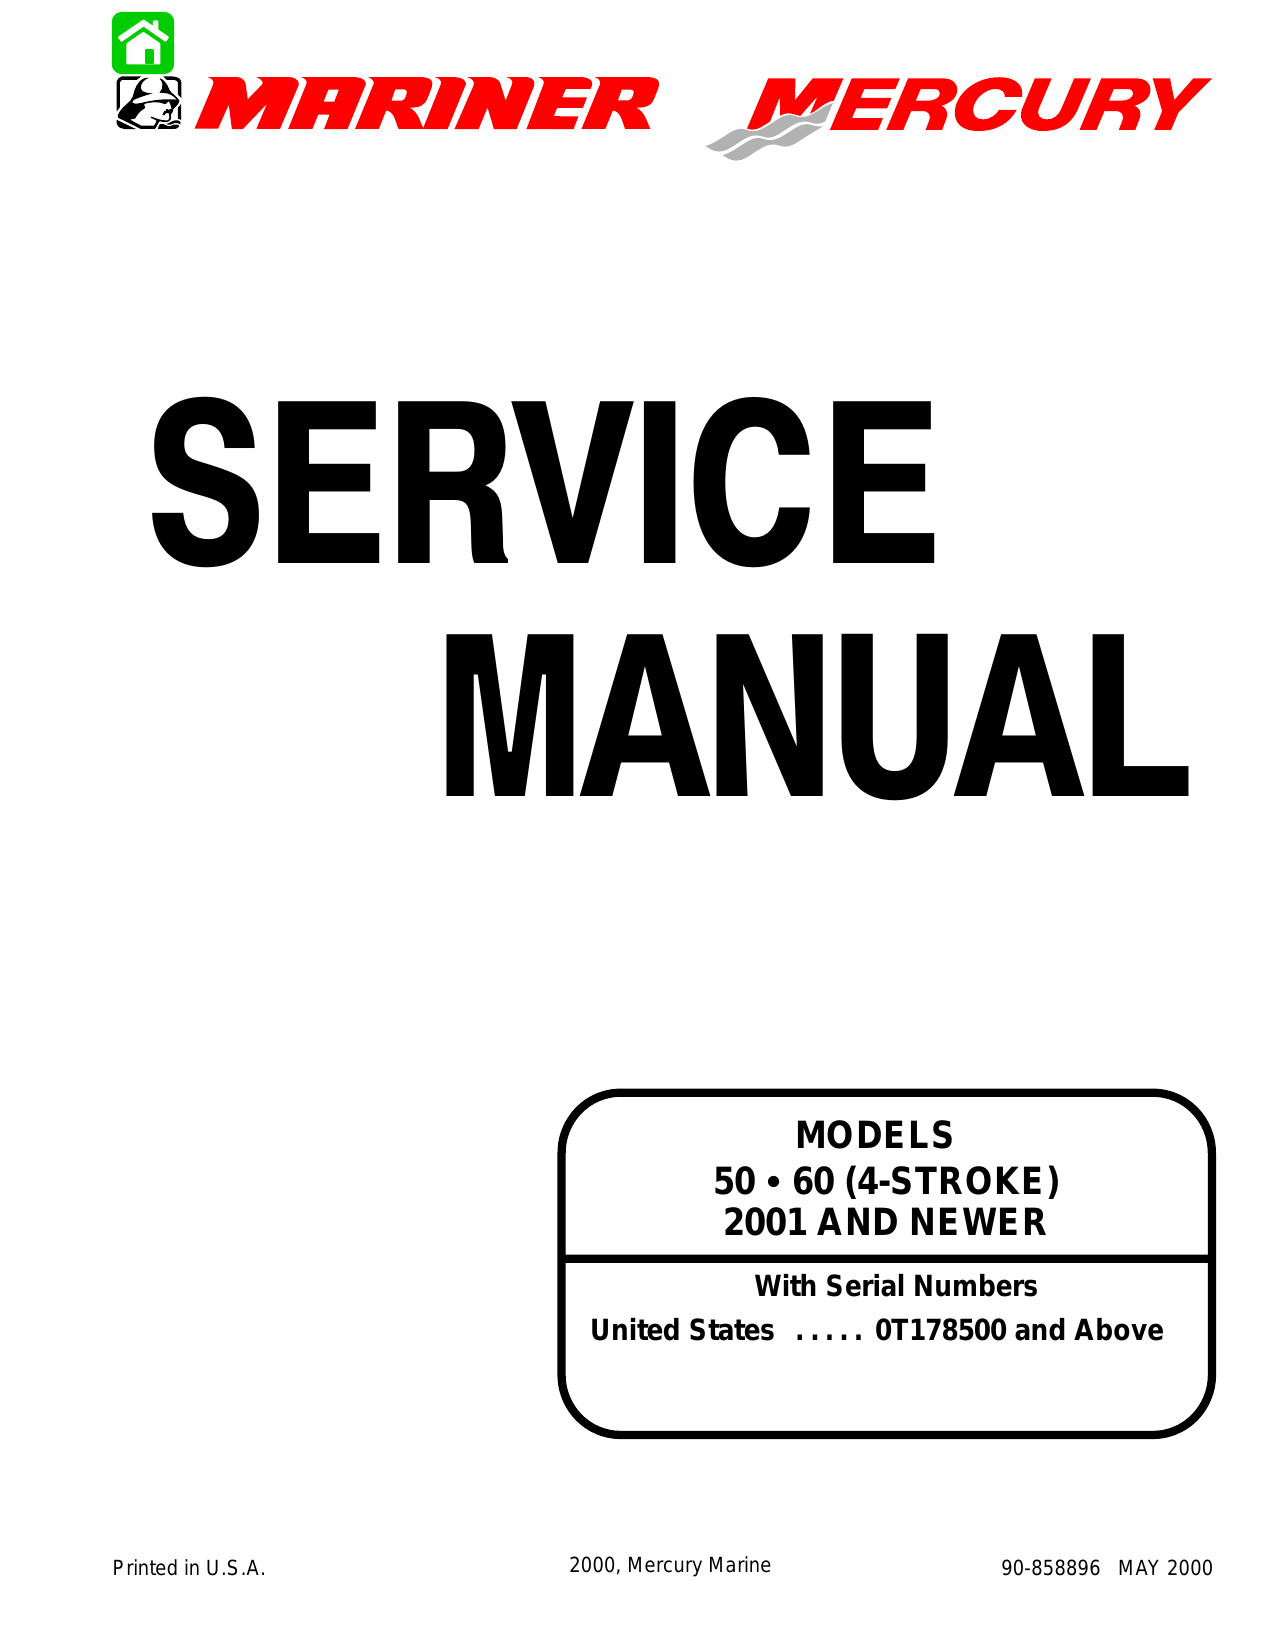 2001 (and newer) Mercury Mariner 50 hp, 60 hp 4-stroke outboard motor service manual Preview image 1